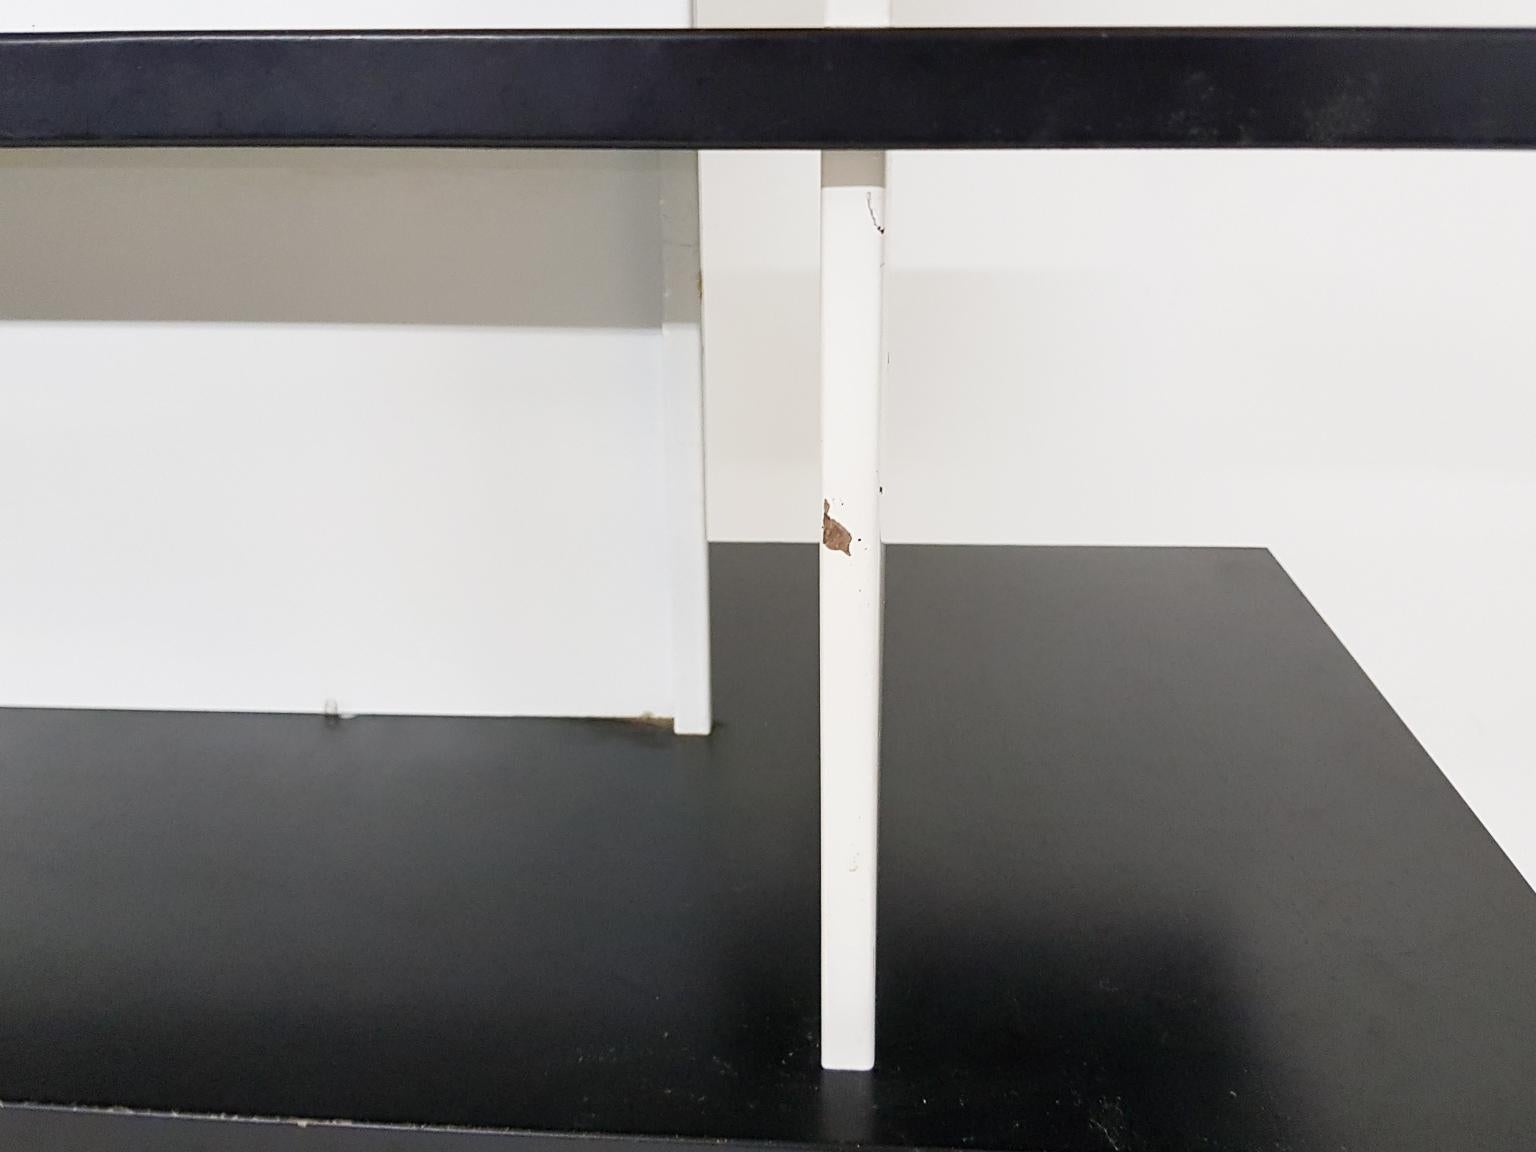 Metal Gerrit Rietveld inspired Room Divider or Bookcase by Wim Rietveld, Dutch, 1960s For Sale